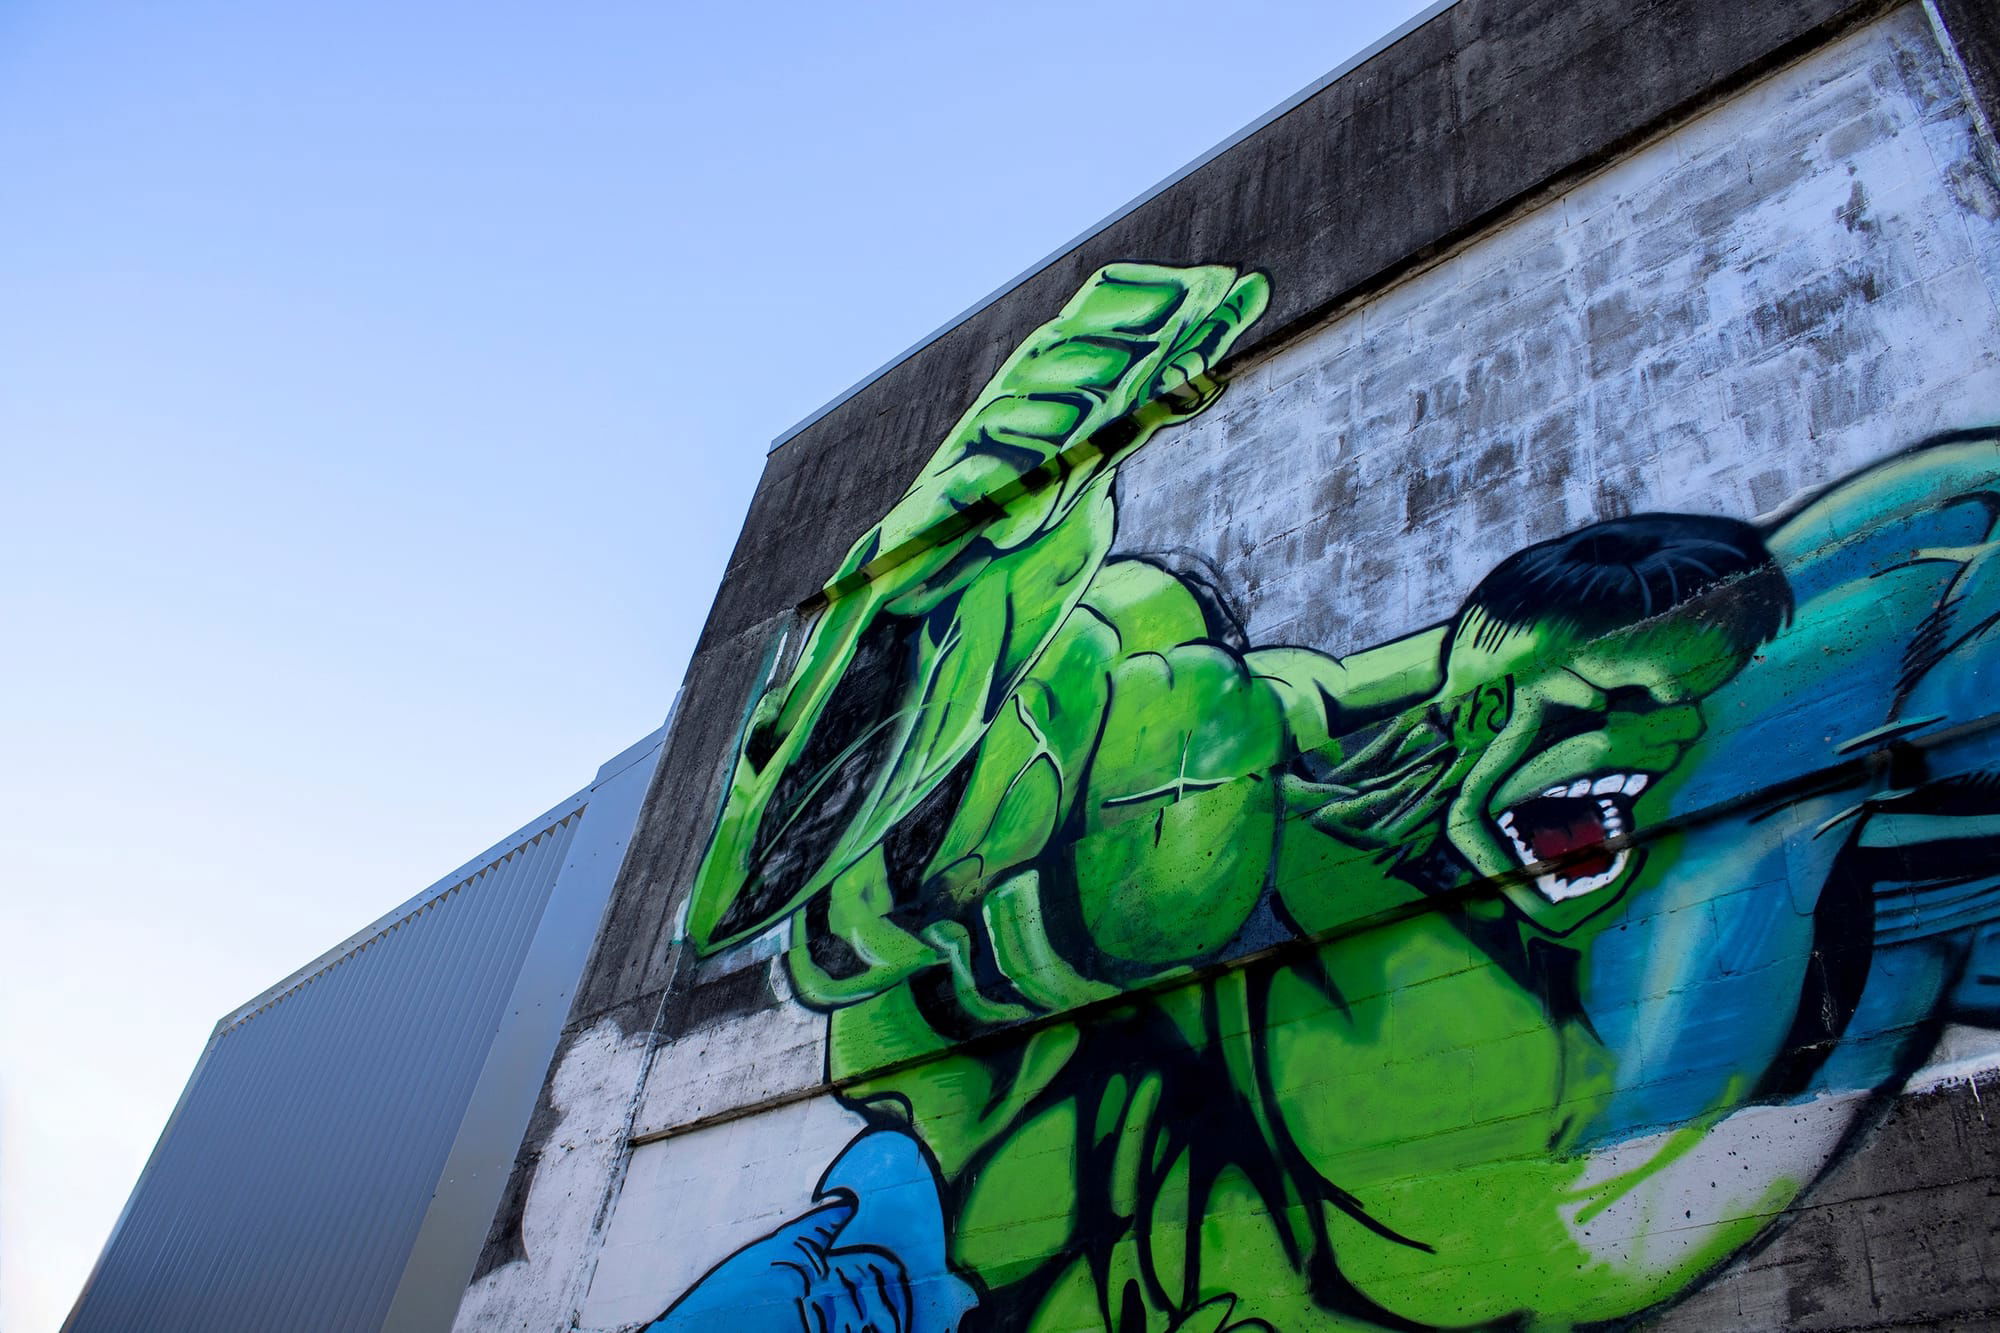 Do you transform into the Hulk when consumed by negative emotions?